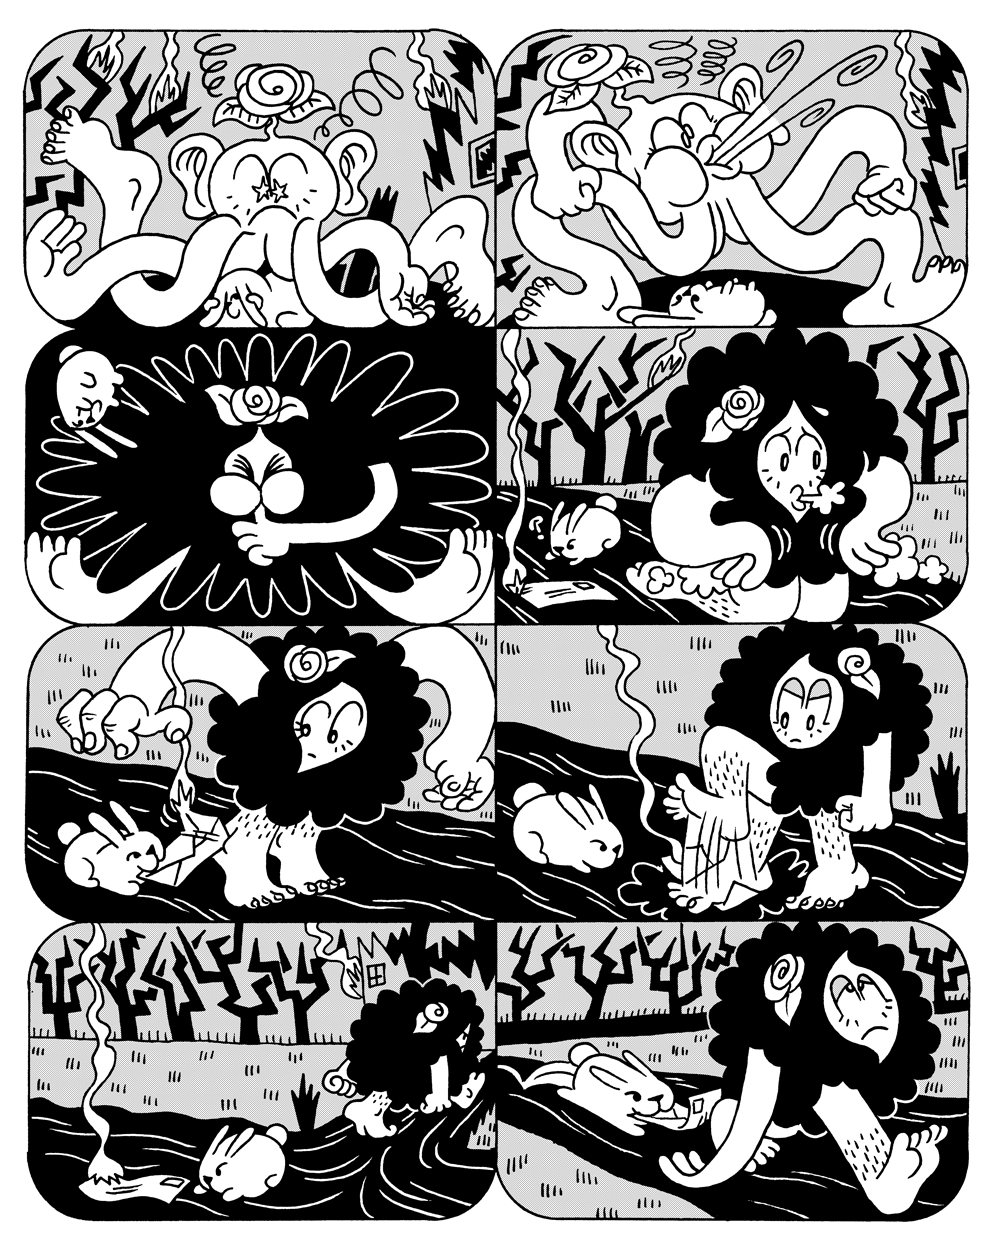 She's Done it All! Part 5 Page 7 by Benjamin Urkowitz by Hazlitt